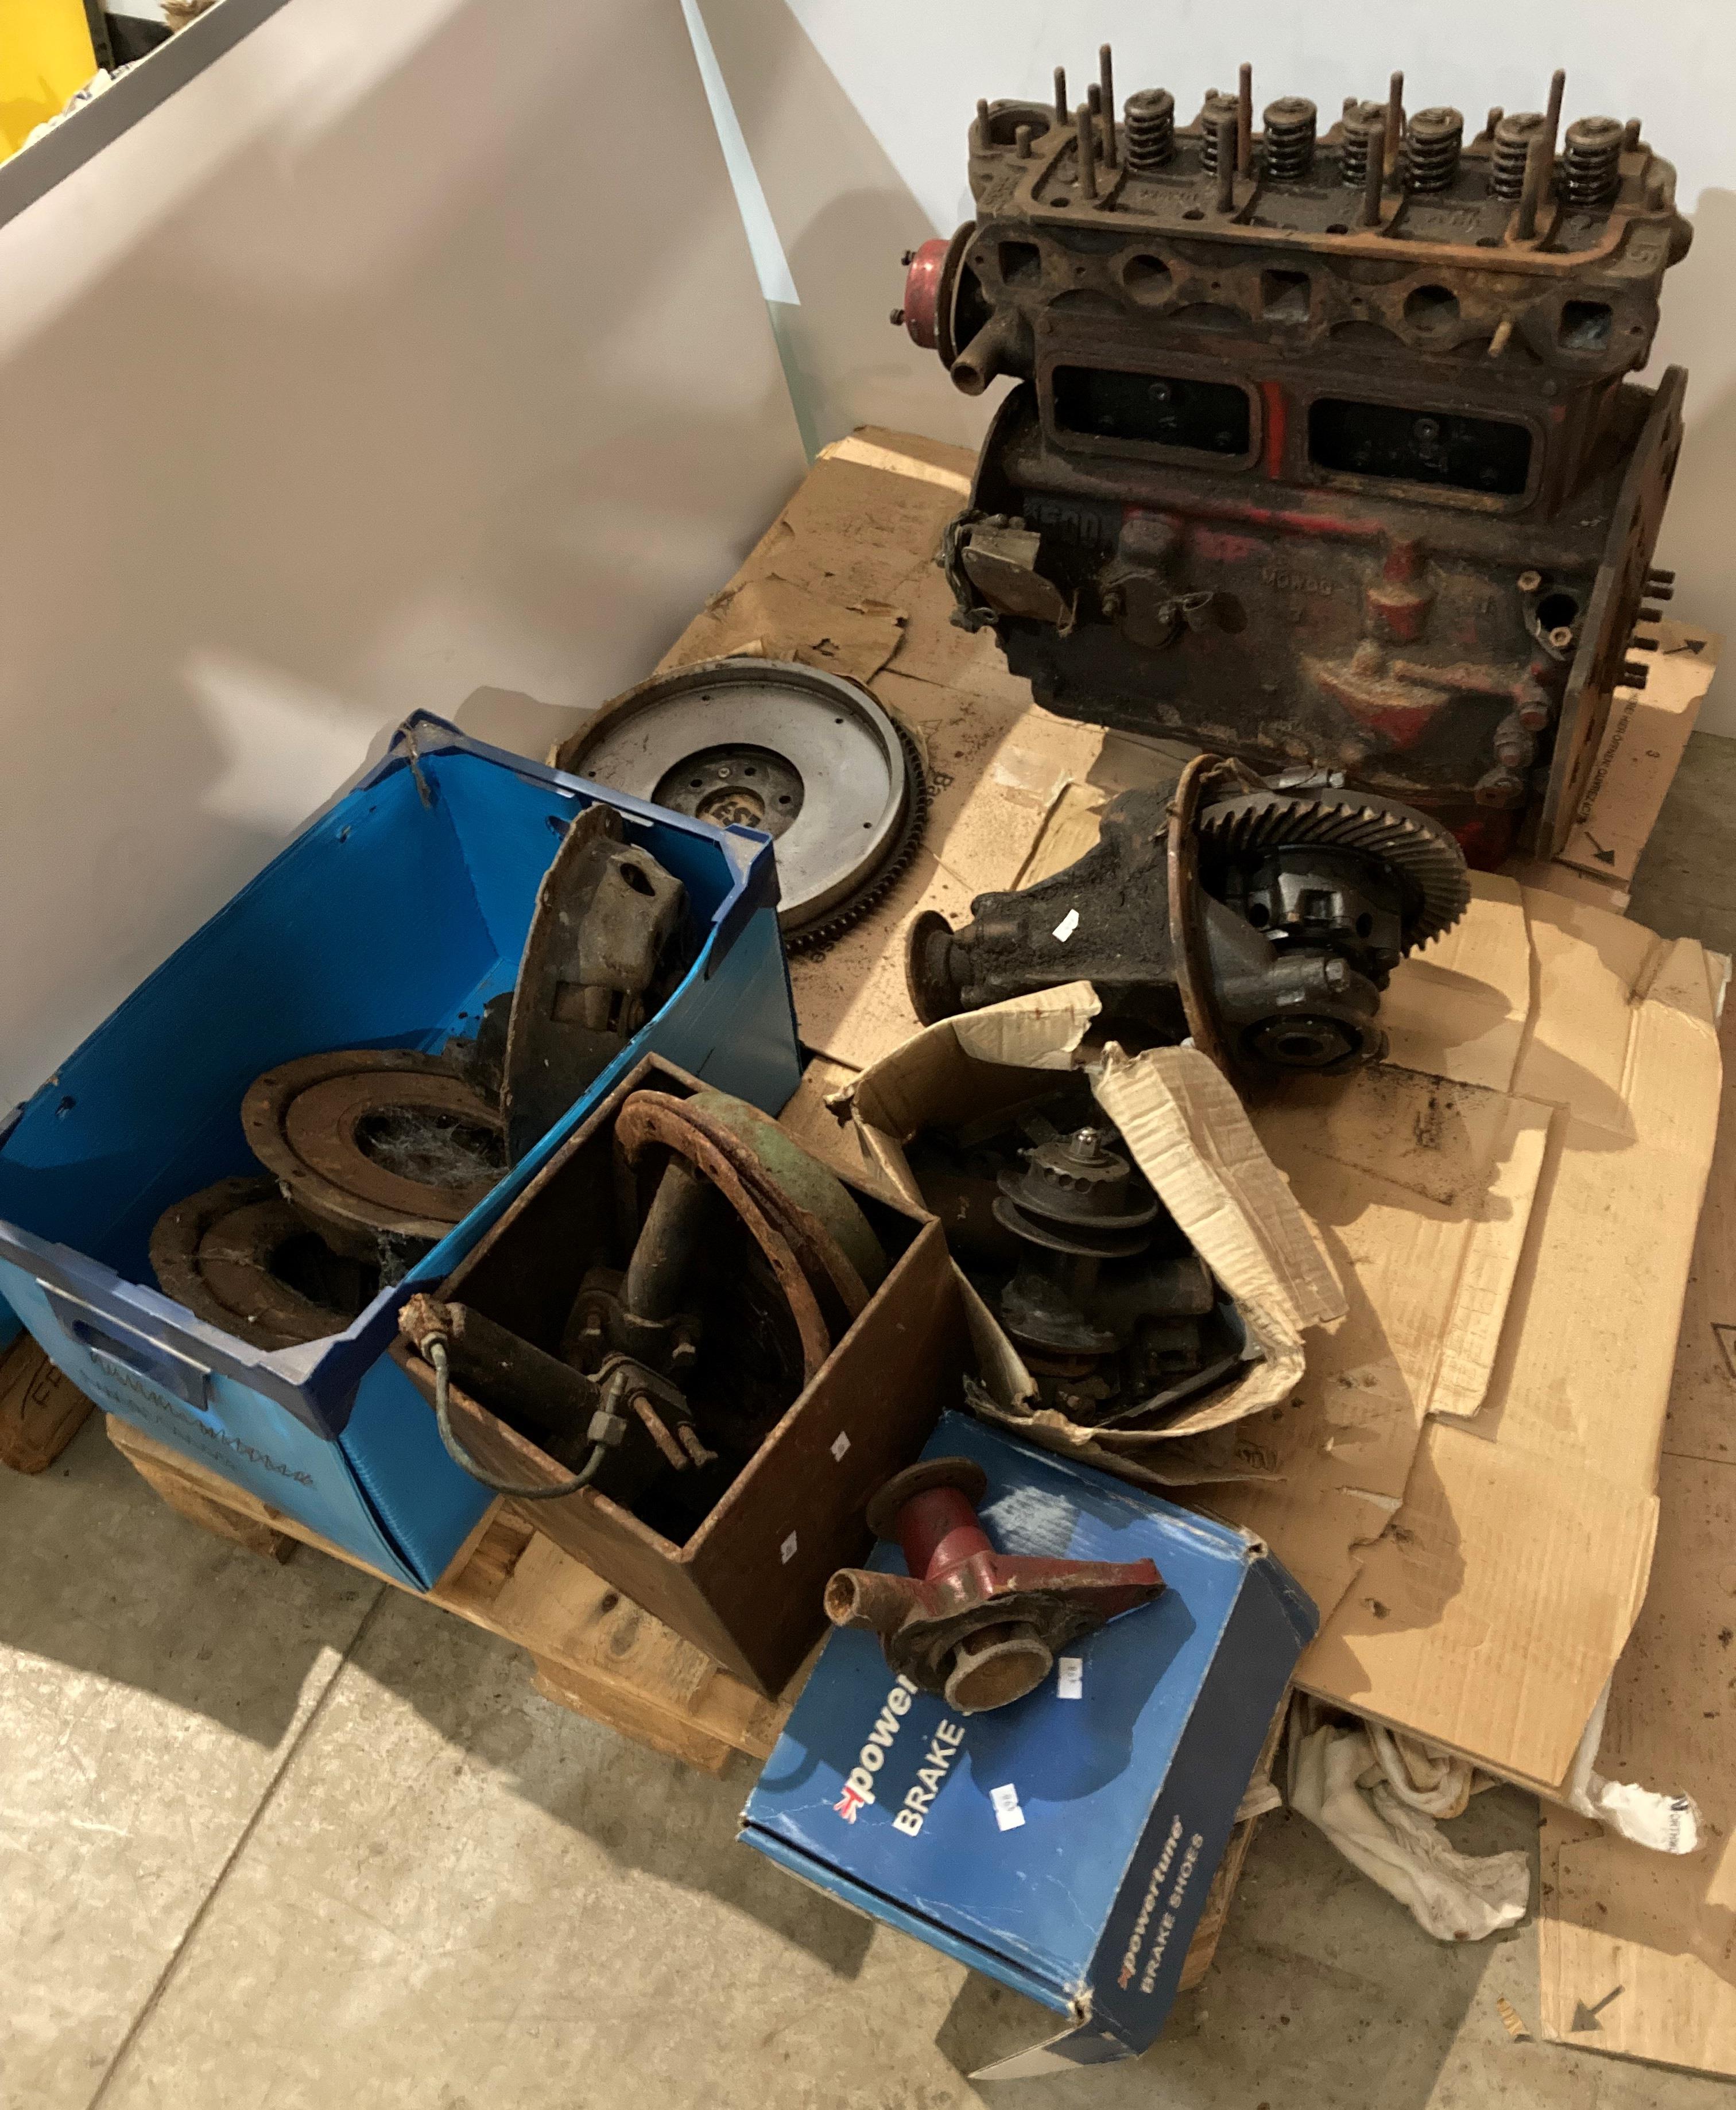 Contents to pallet - a 1500 MG (possibly for a VA Touer) rare engine and assorted engine parts